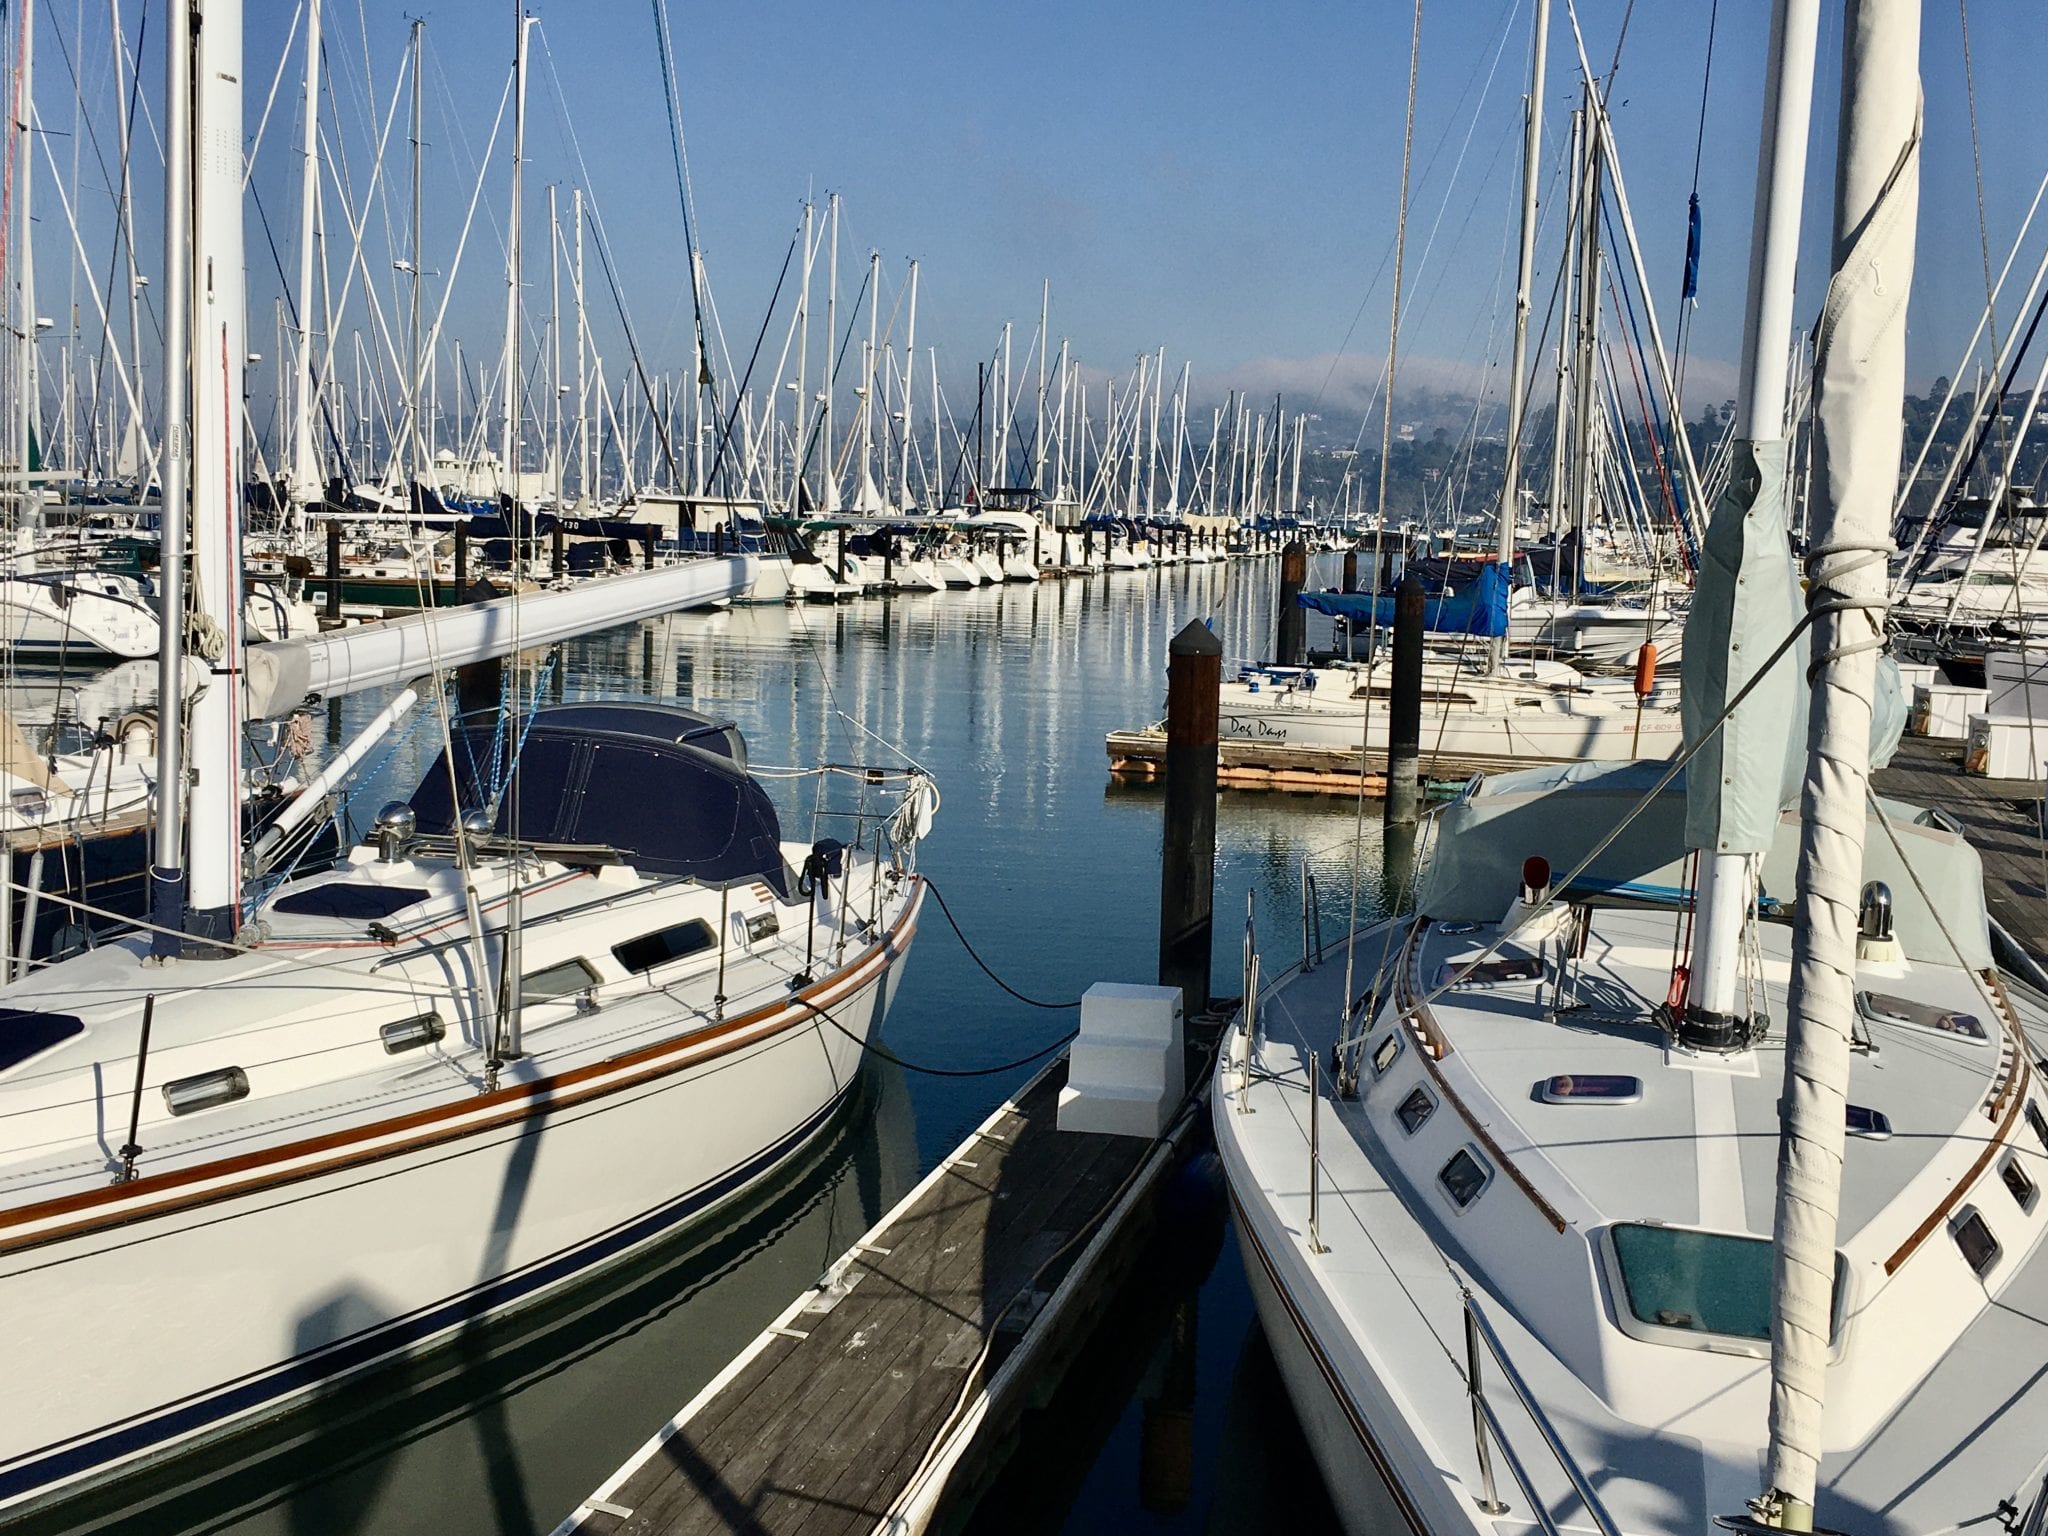 SAUSALITO - a seaside town in Marin County, California. - PHYL On The Go